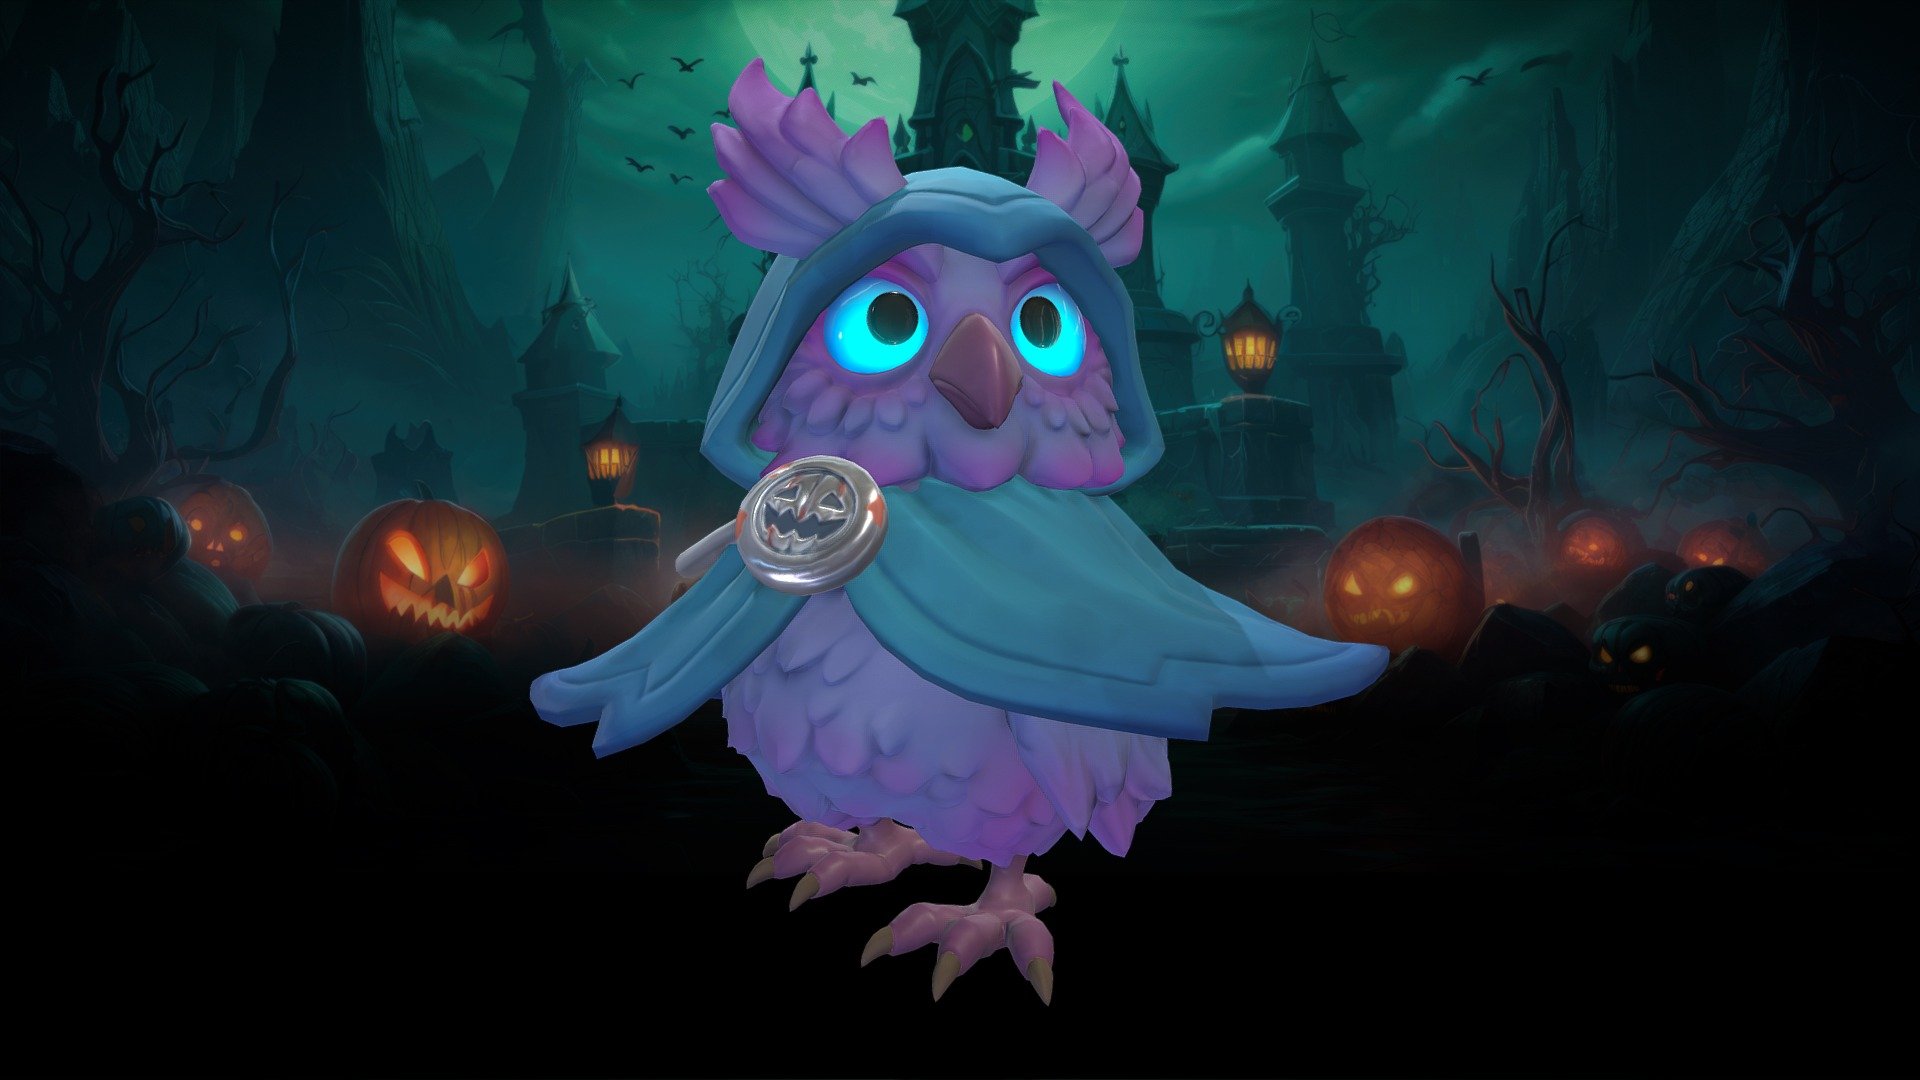 Stylized character for a project.

Software used: Zbrush, Autodesk Maya, Autodesk 3ds Max, Substance Painter - Stylized Halloween Owl - 3D model by N-hance Studio (@Malice6731) 3d model